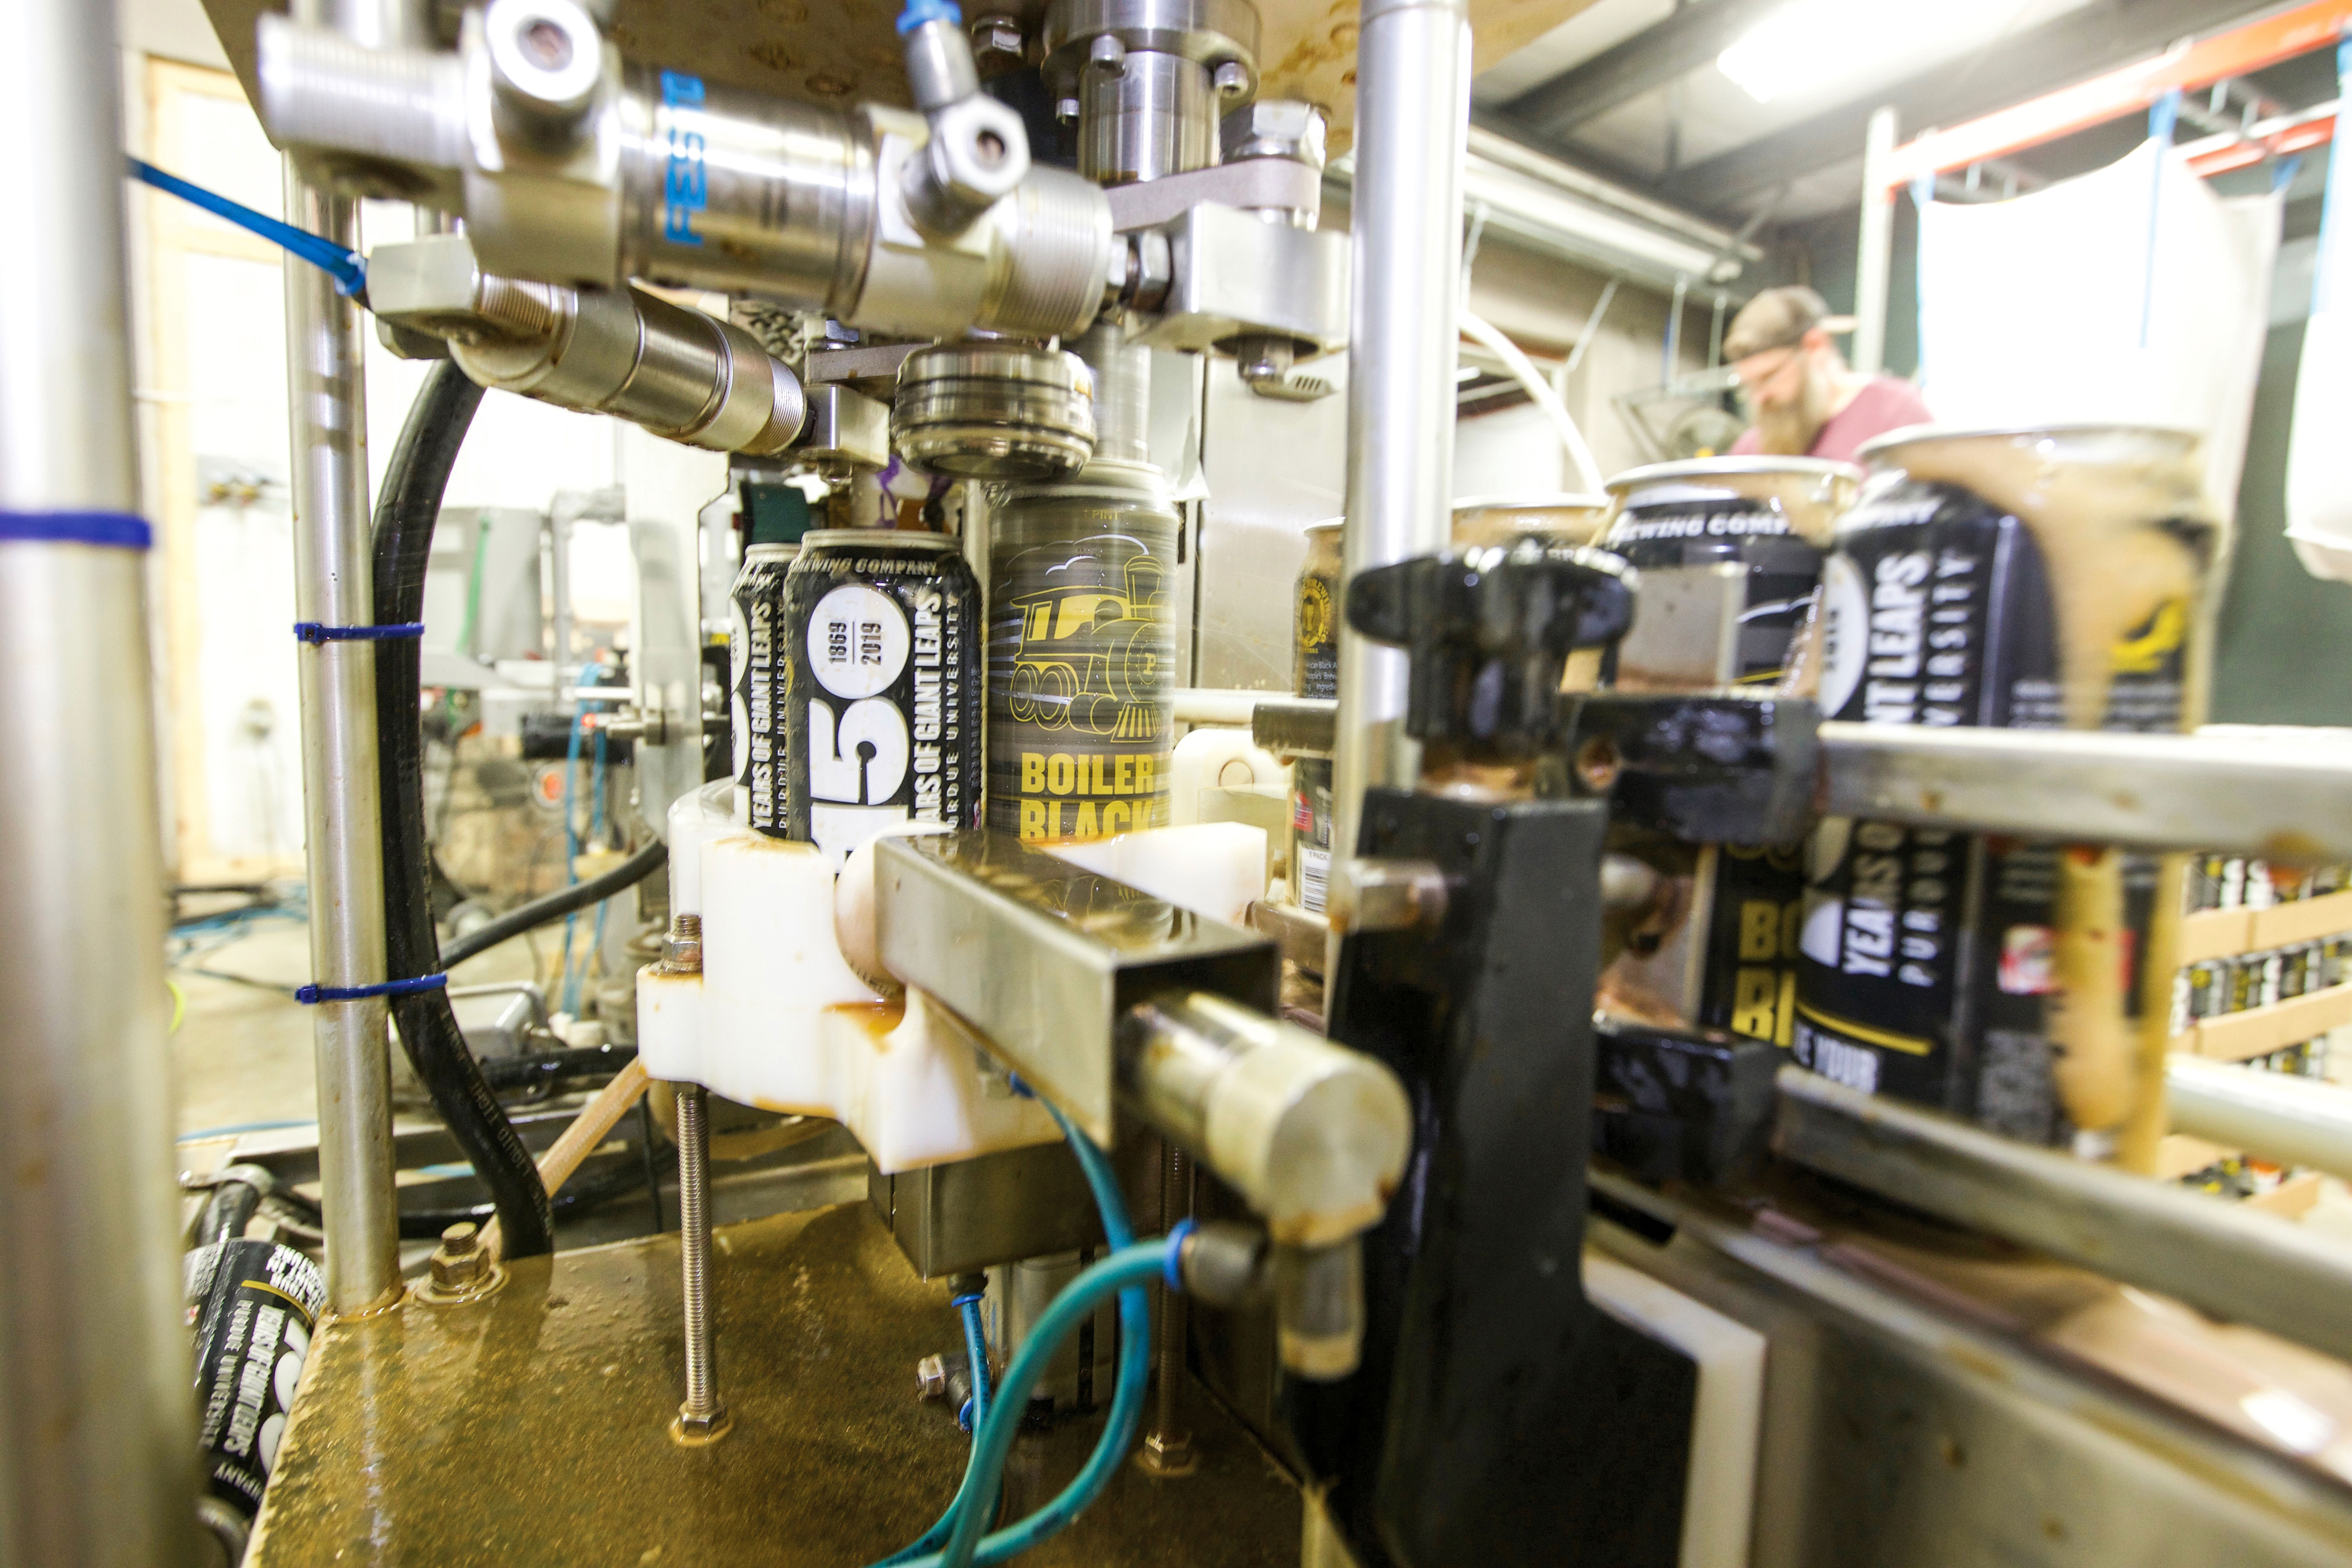 cans of Purdue Black beer are spinning off the line